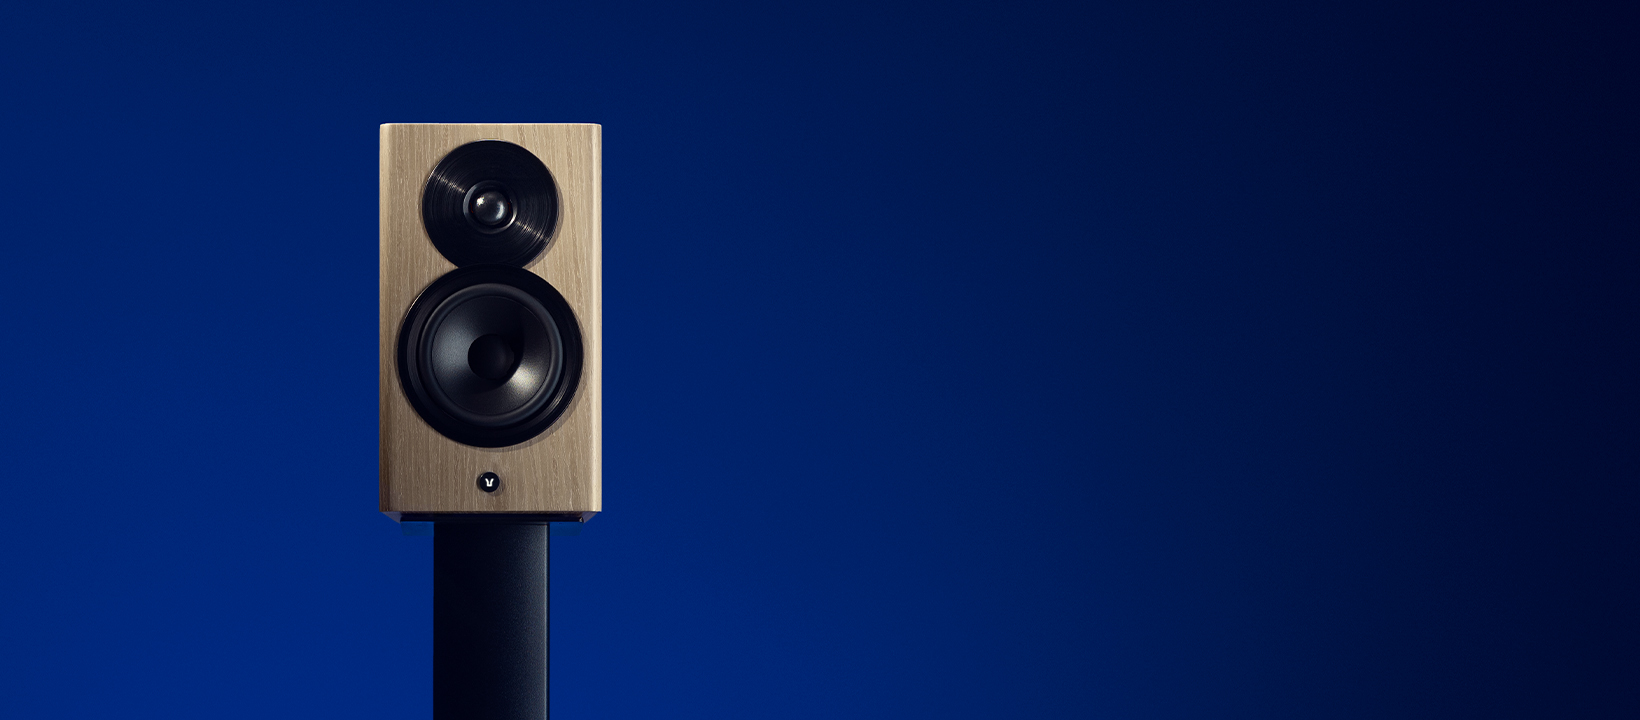 Focus 10 - Stereophile